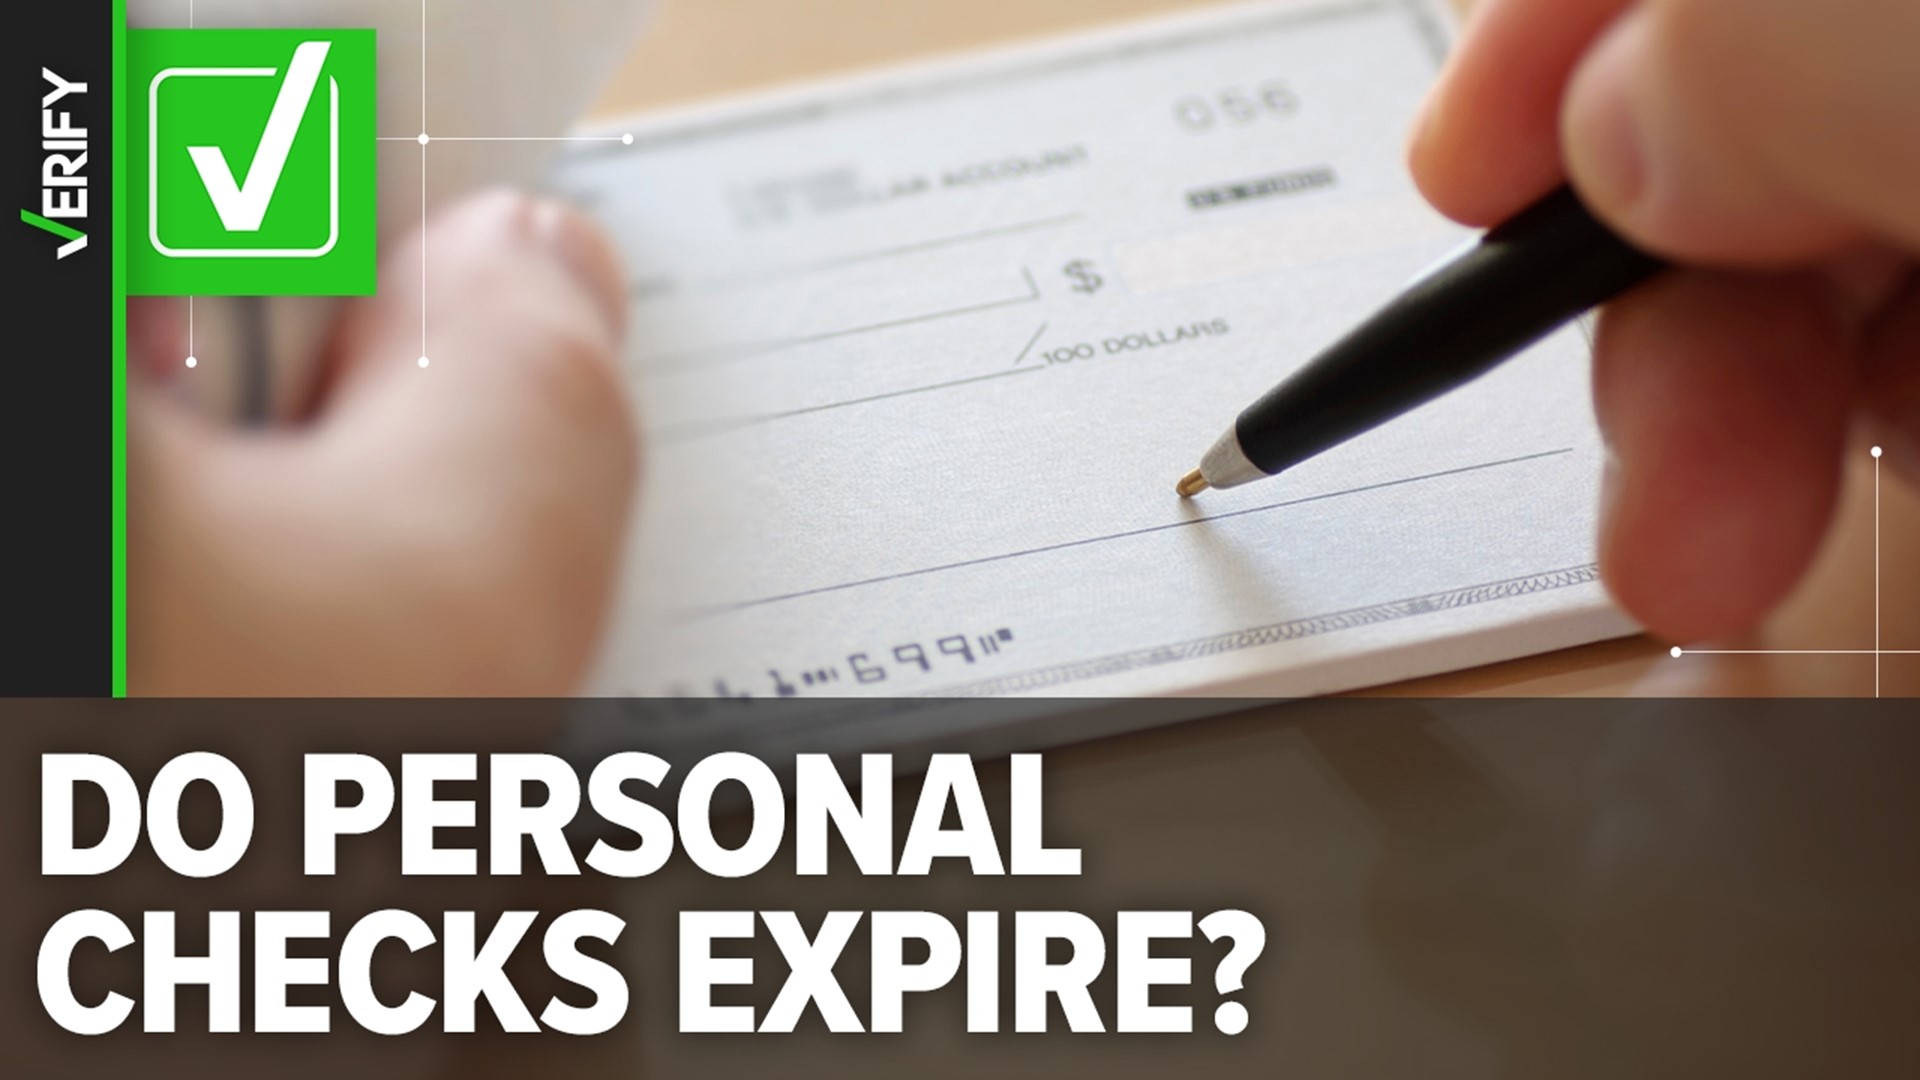 Personal checks typically expire after 180 days or six months. If you have an expired or stale check, you can request a replacement from the check issuer.